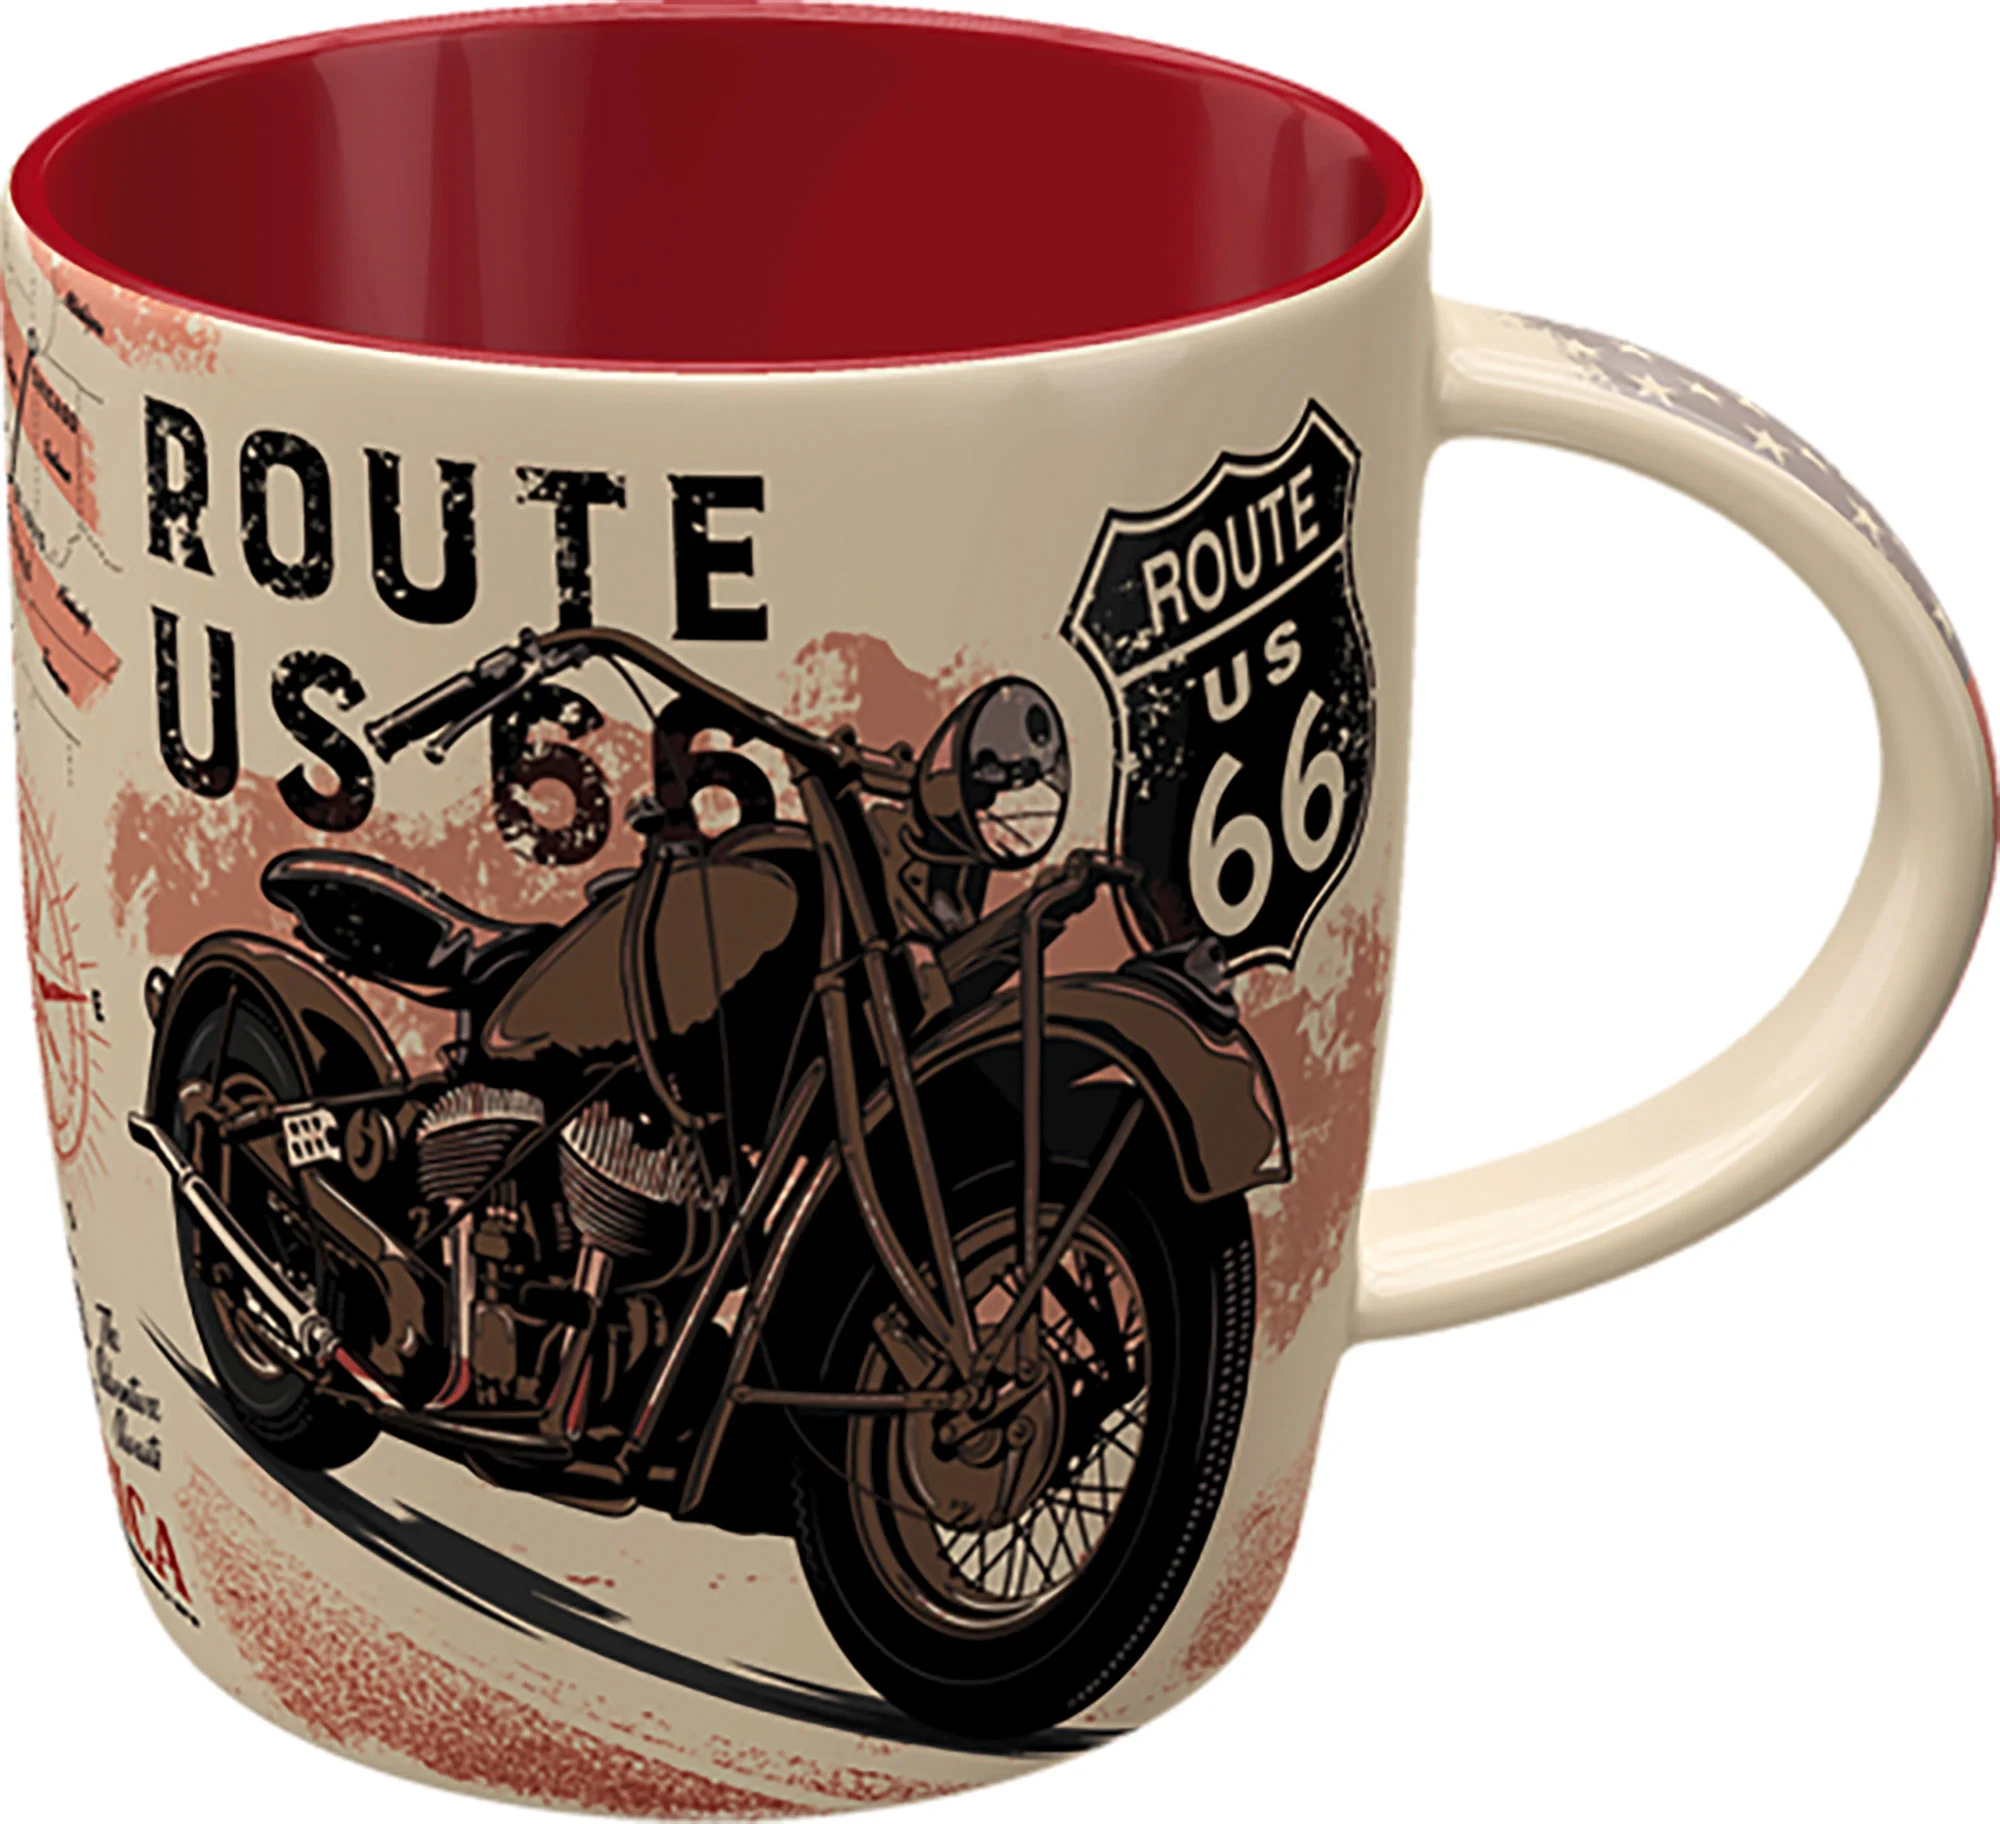 *ROUTE 66 MOTHER ROAD*